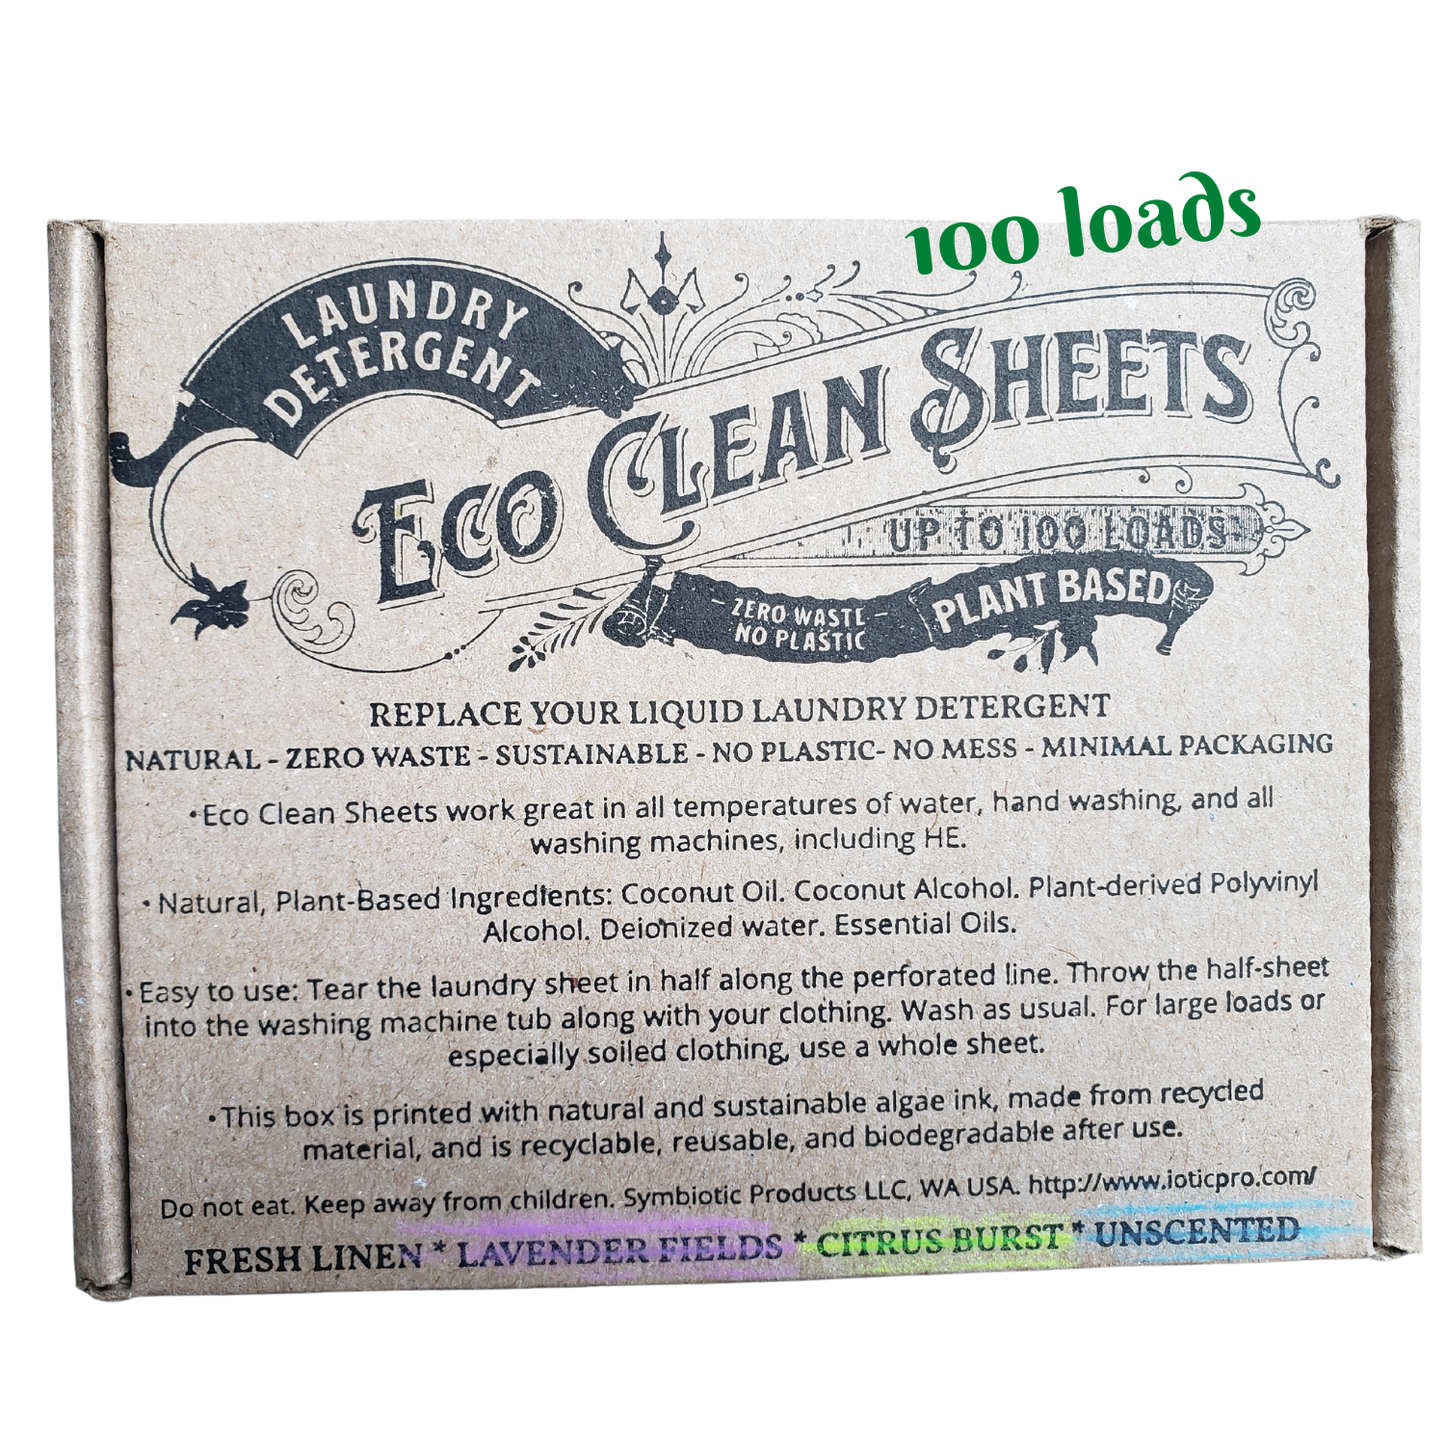 Eco Clean Laundry Sheets -400 Loads Packaged